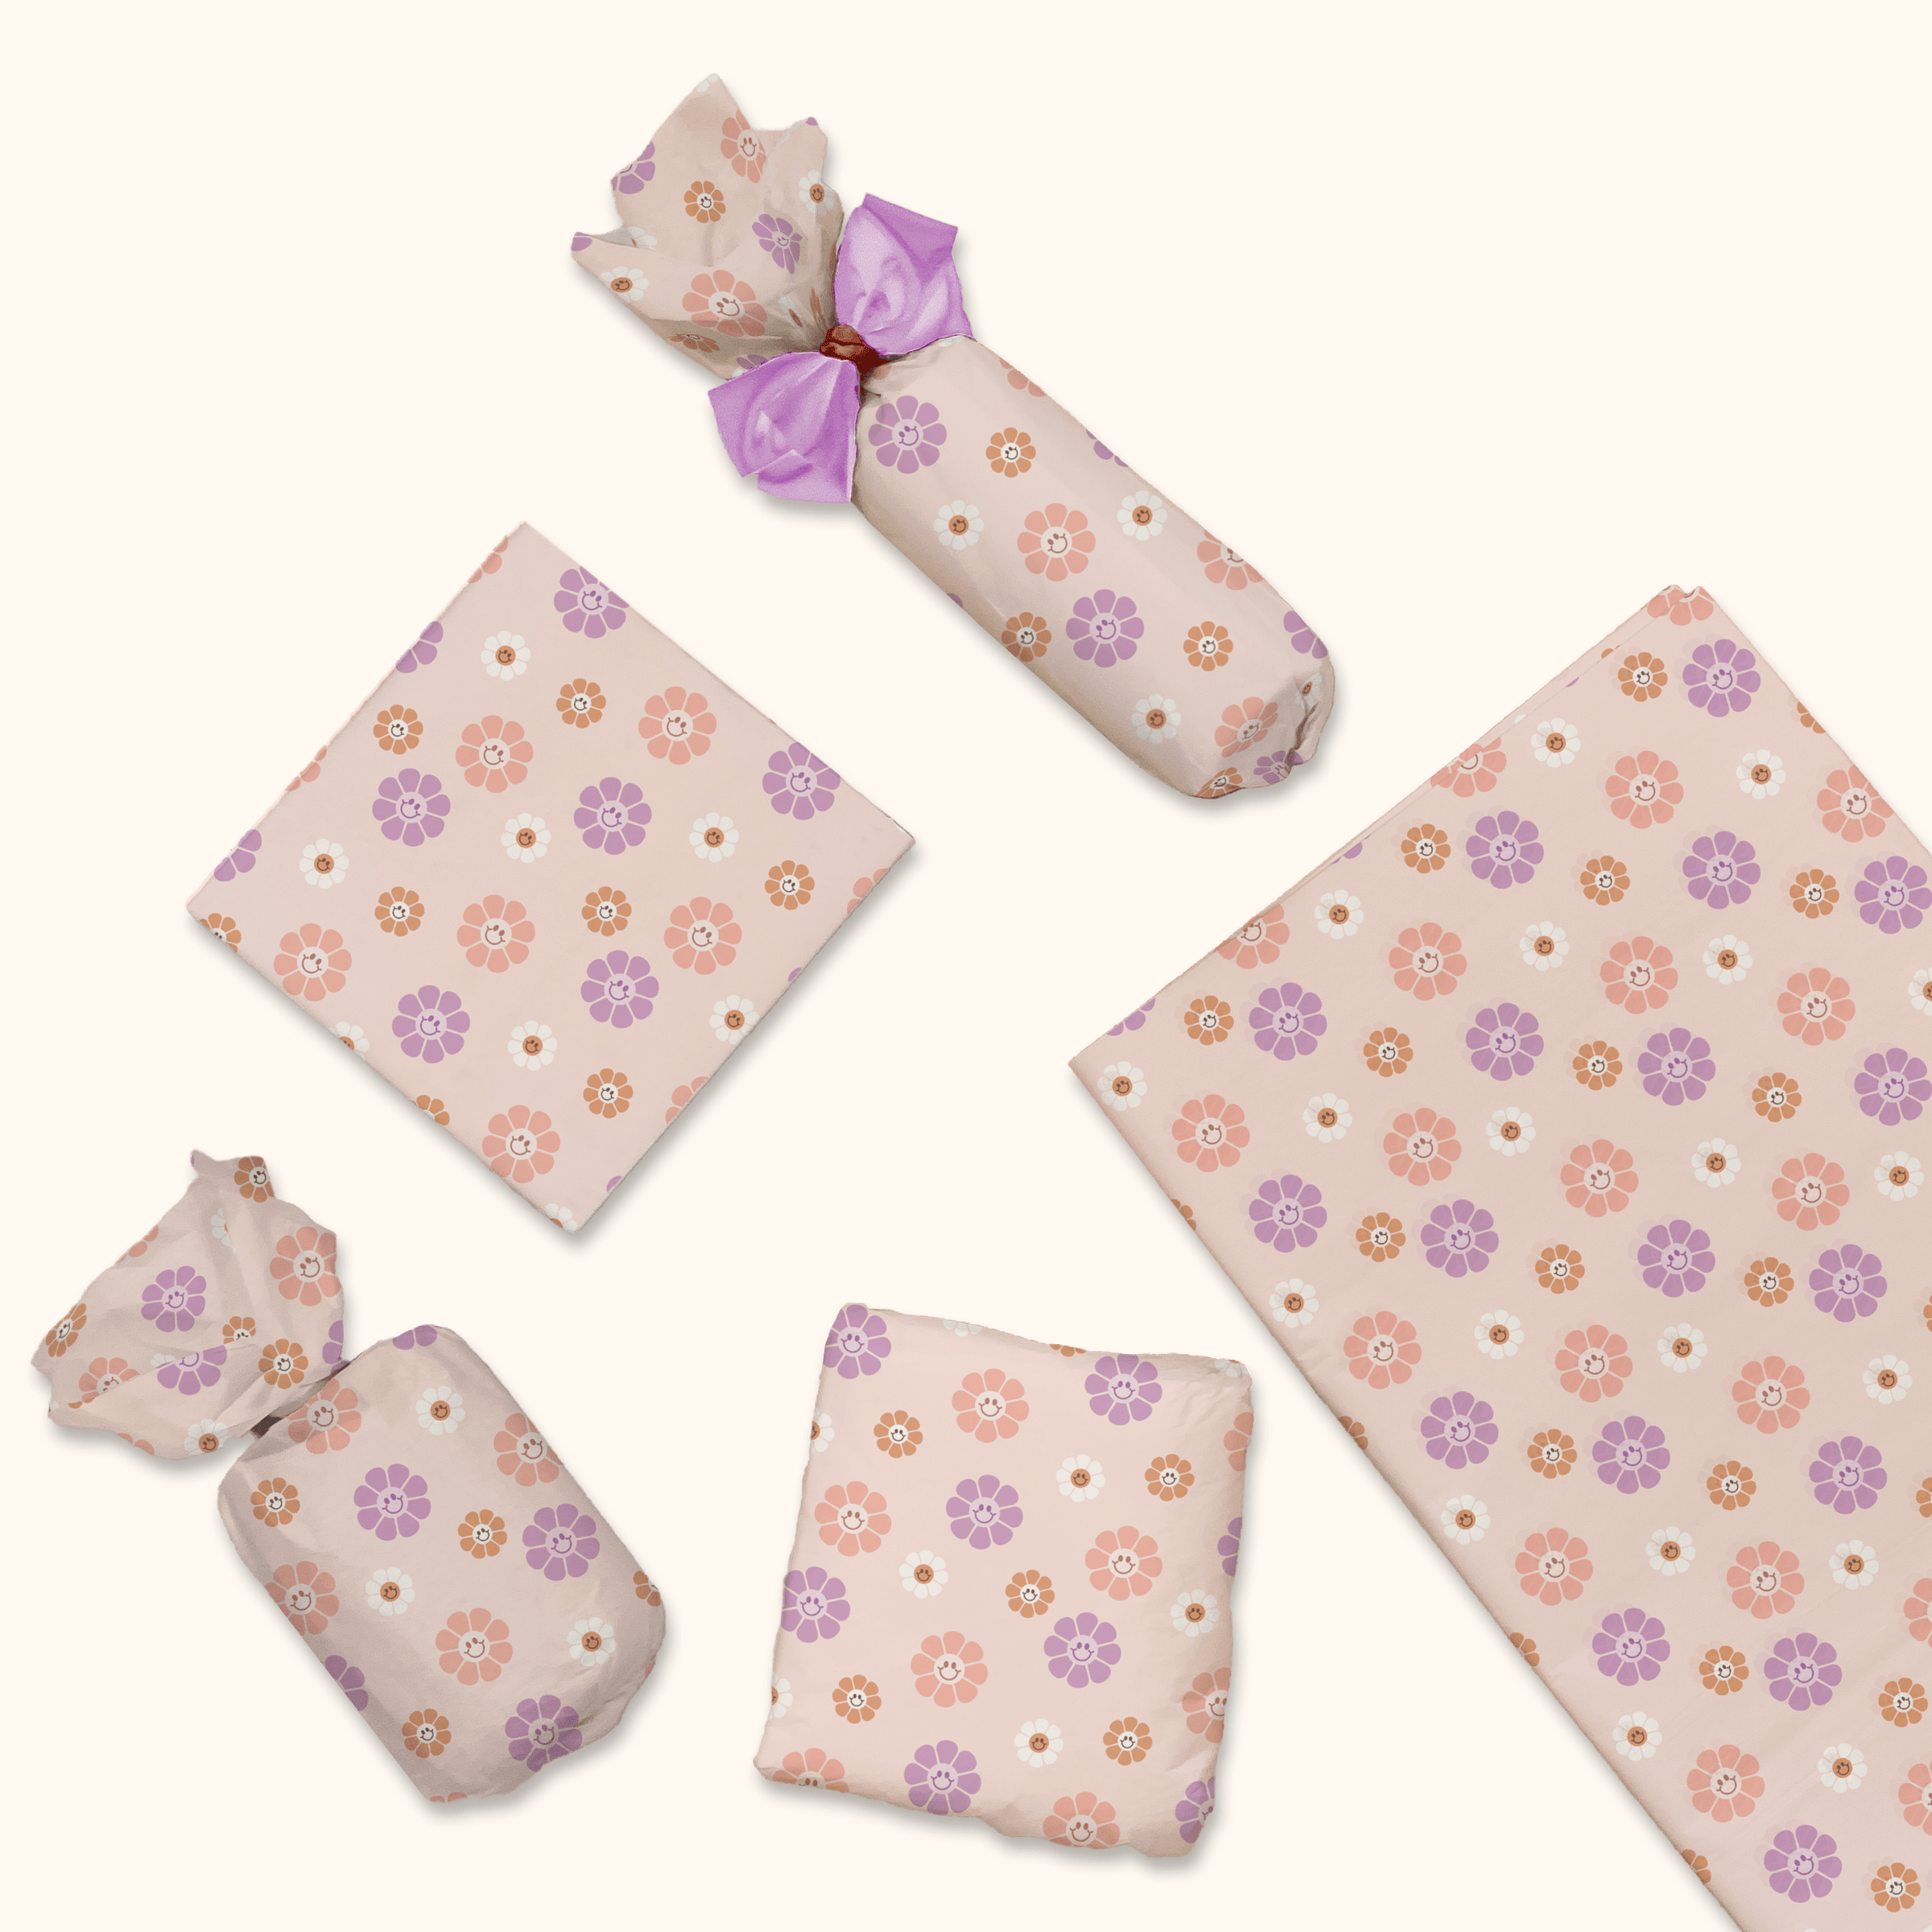 flora print tissue wrapping paper pro supply global